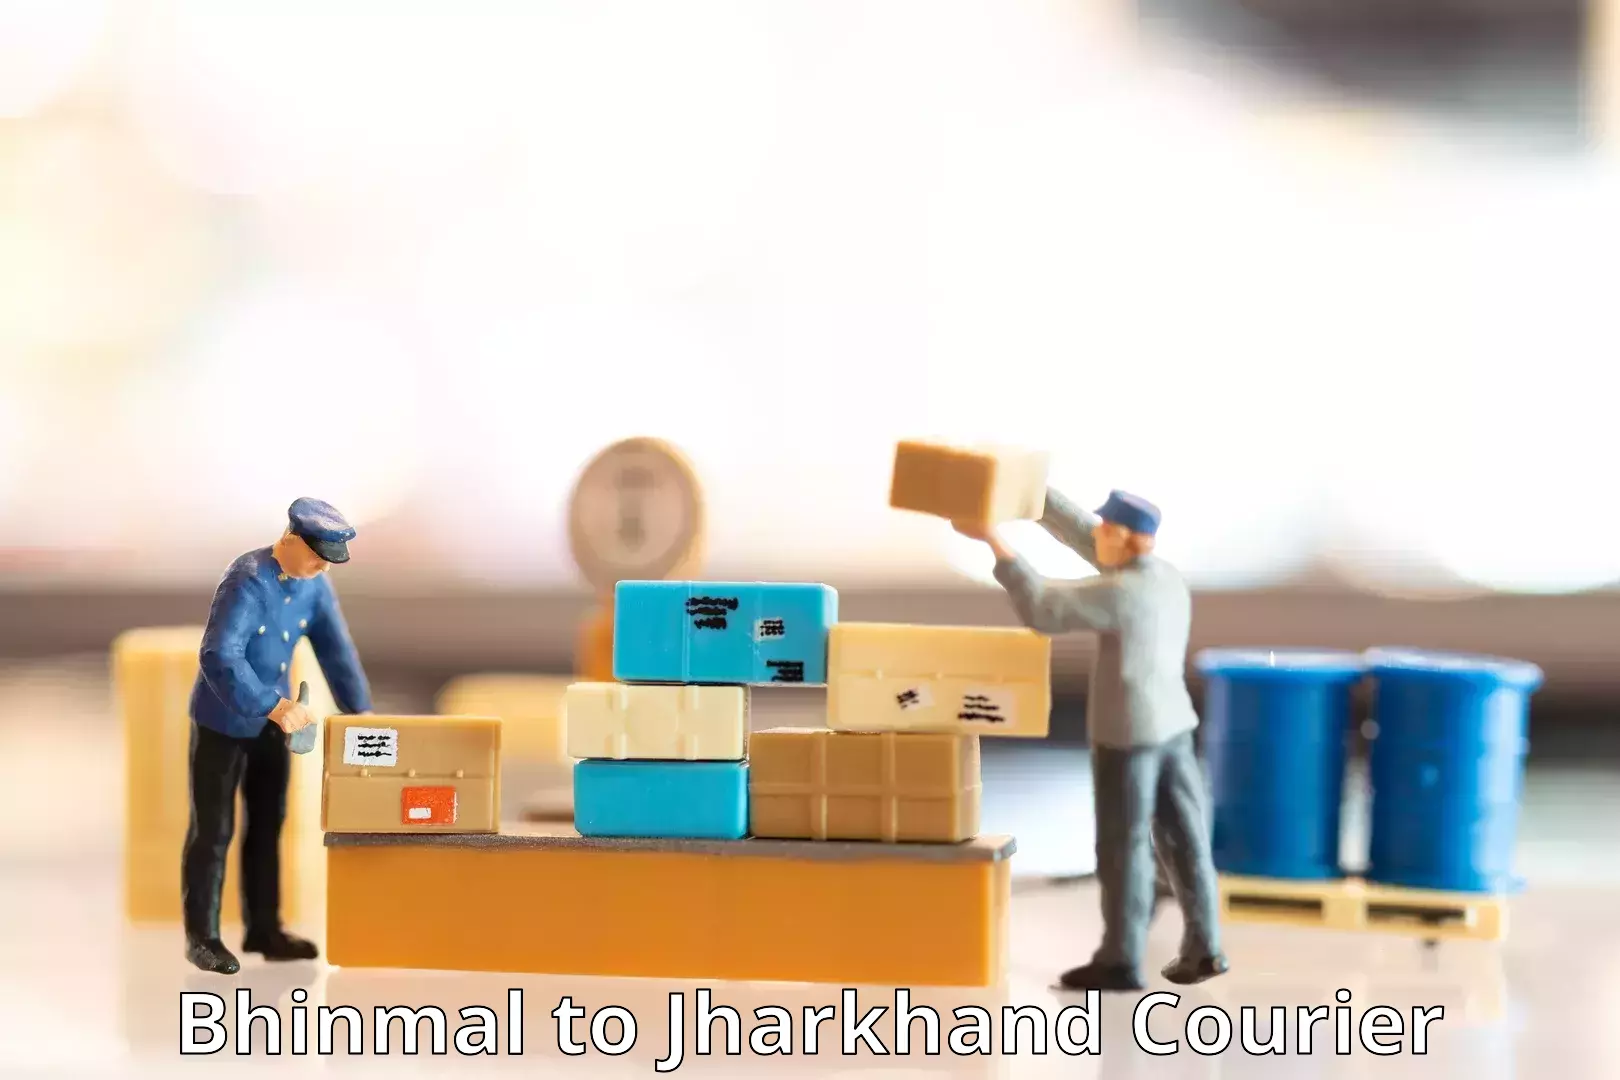 Express mail service Bhinmal to Jharkhand